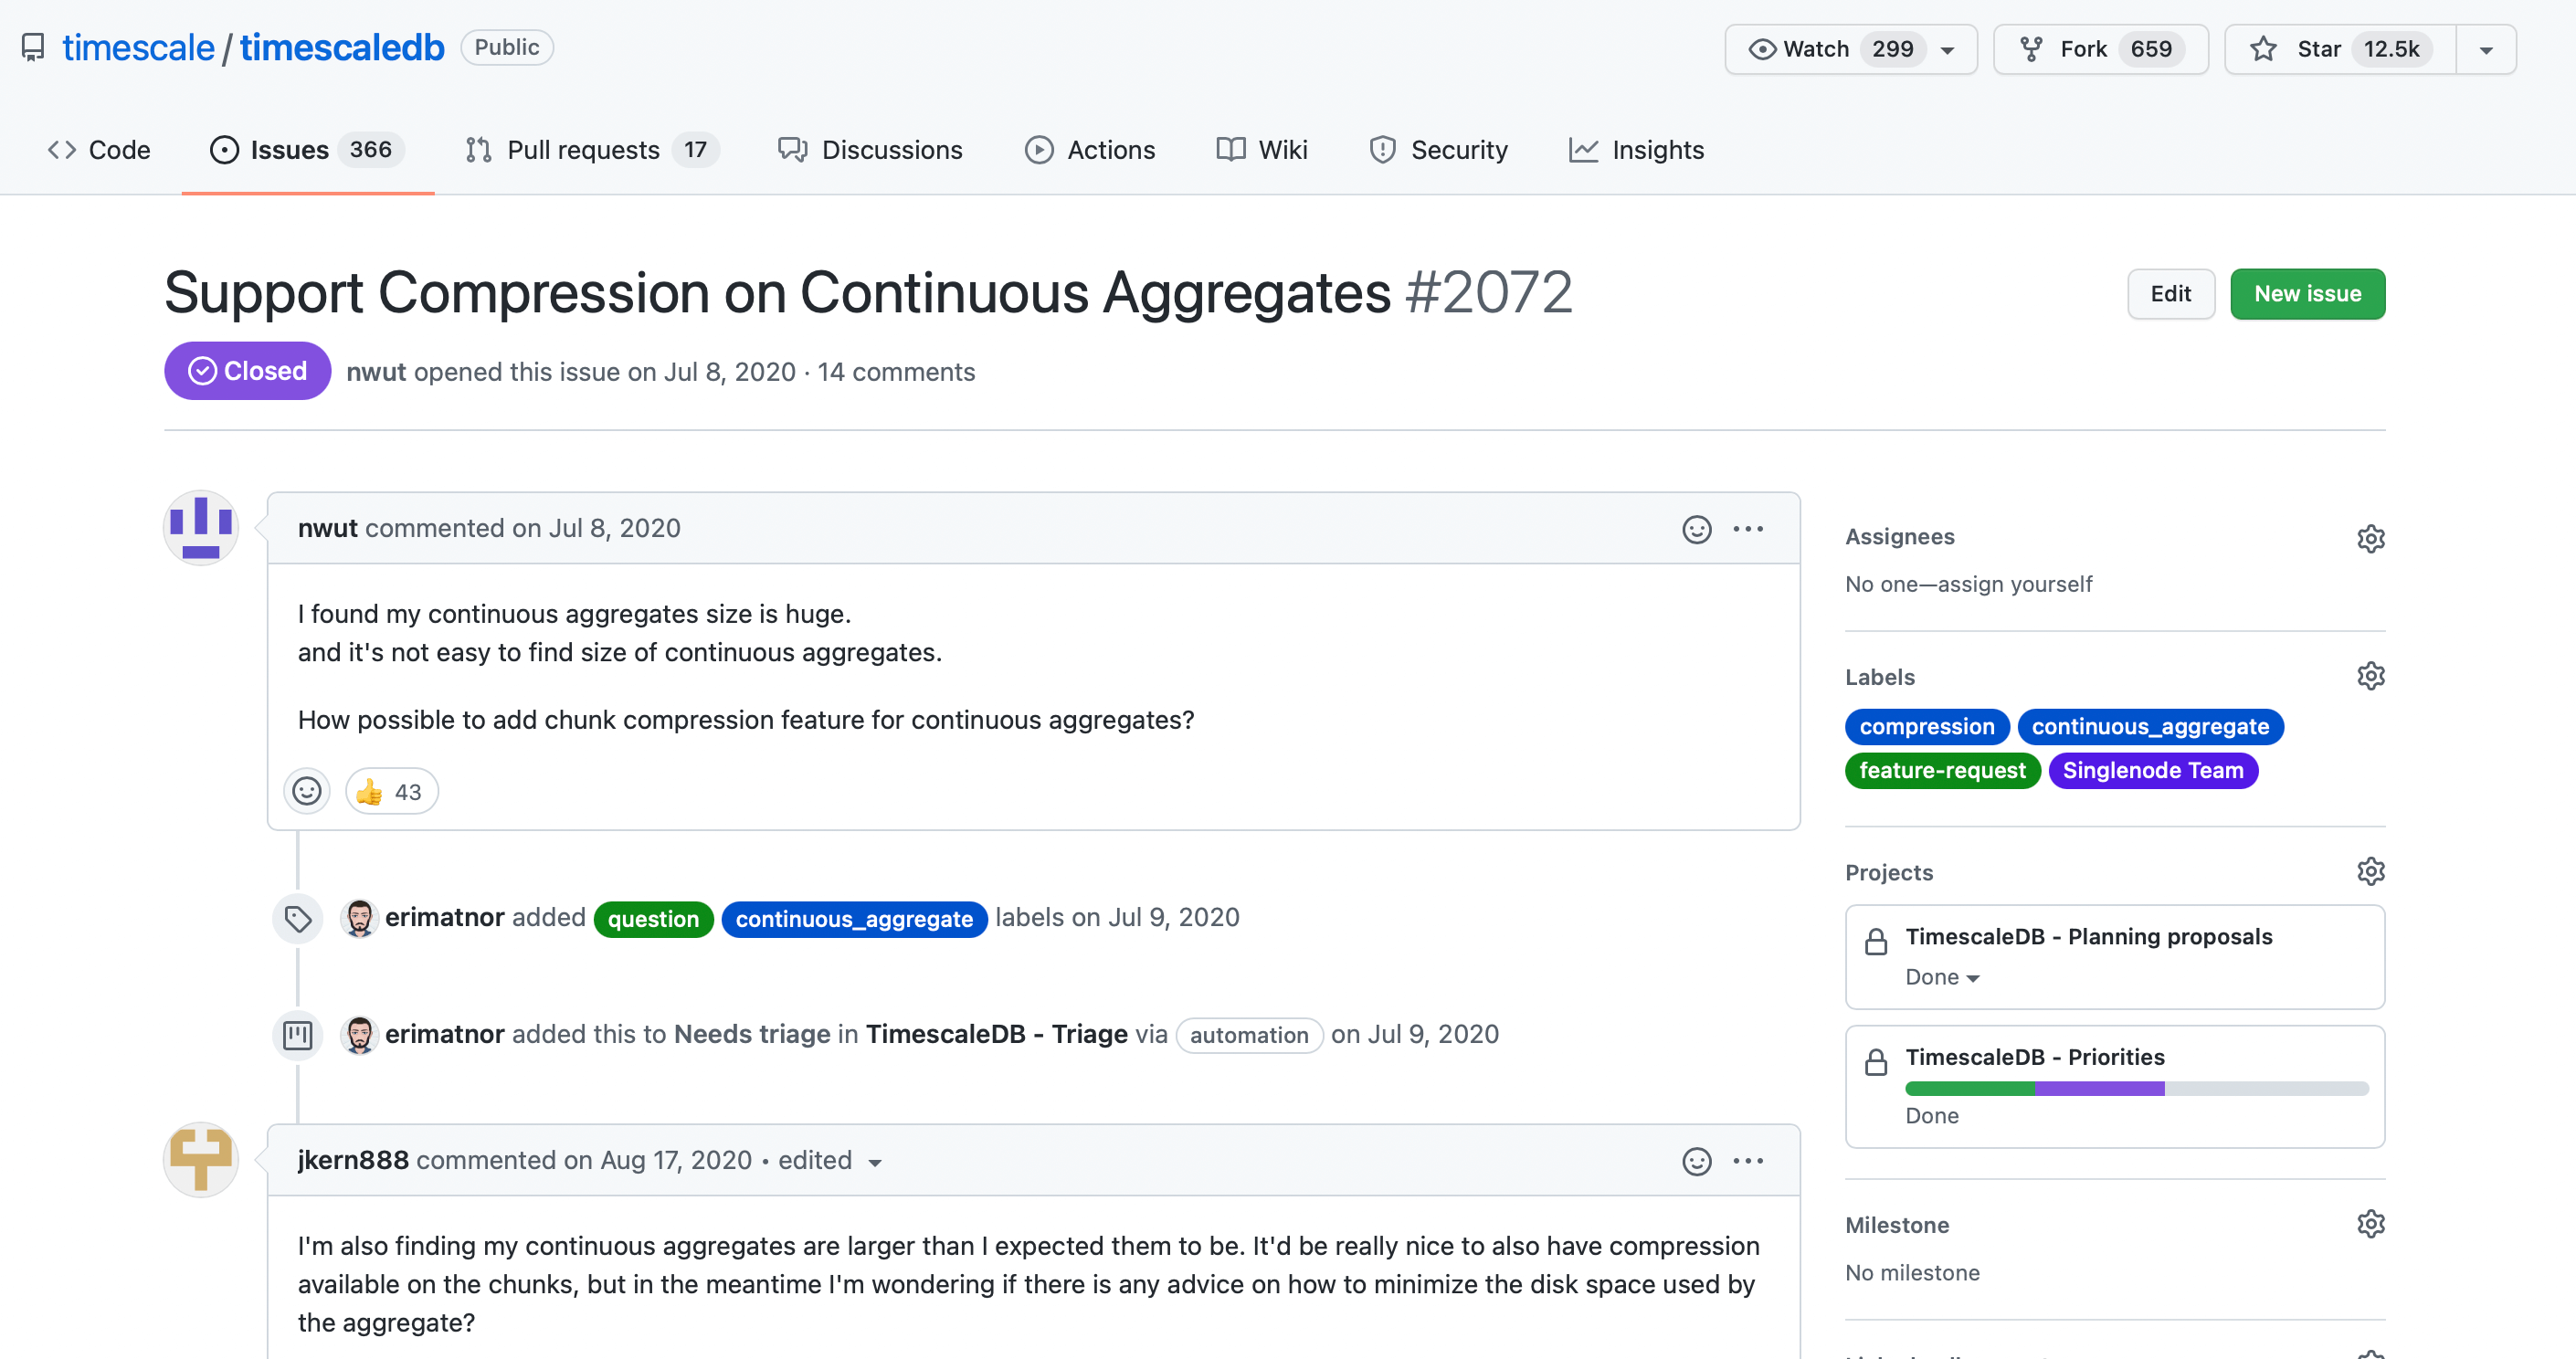 Screenshot of the GitHub issue that originated the support for compression in continuous aggregates 